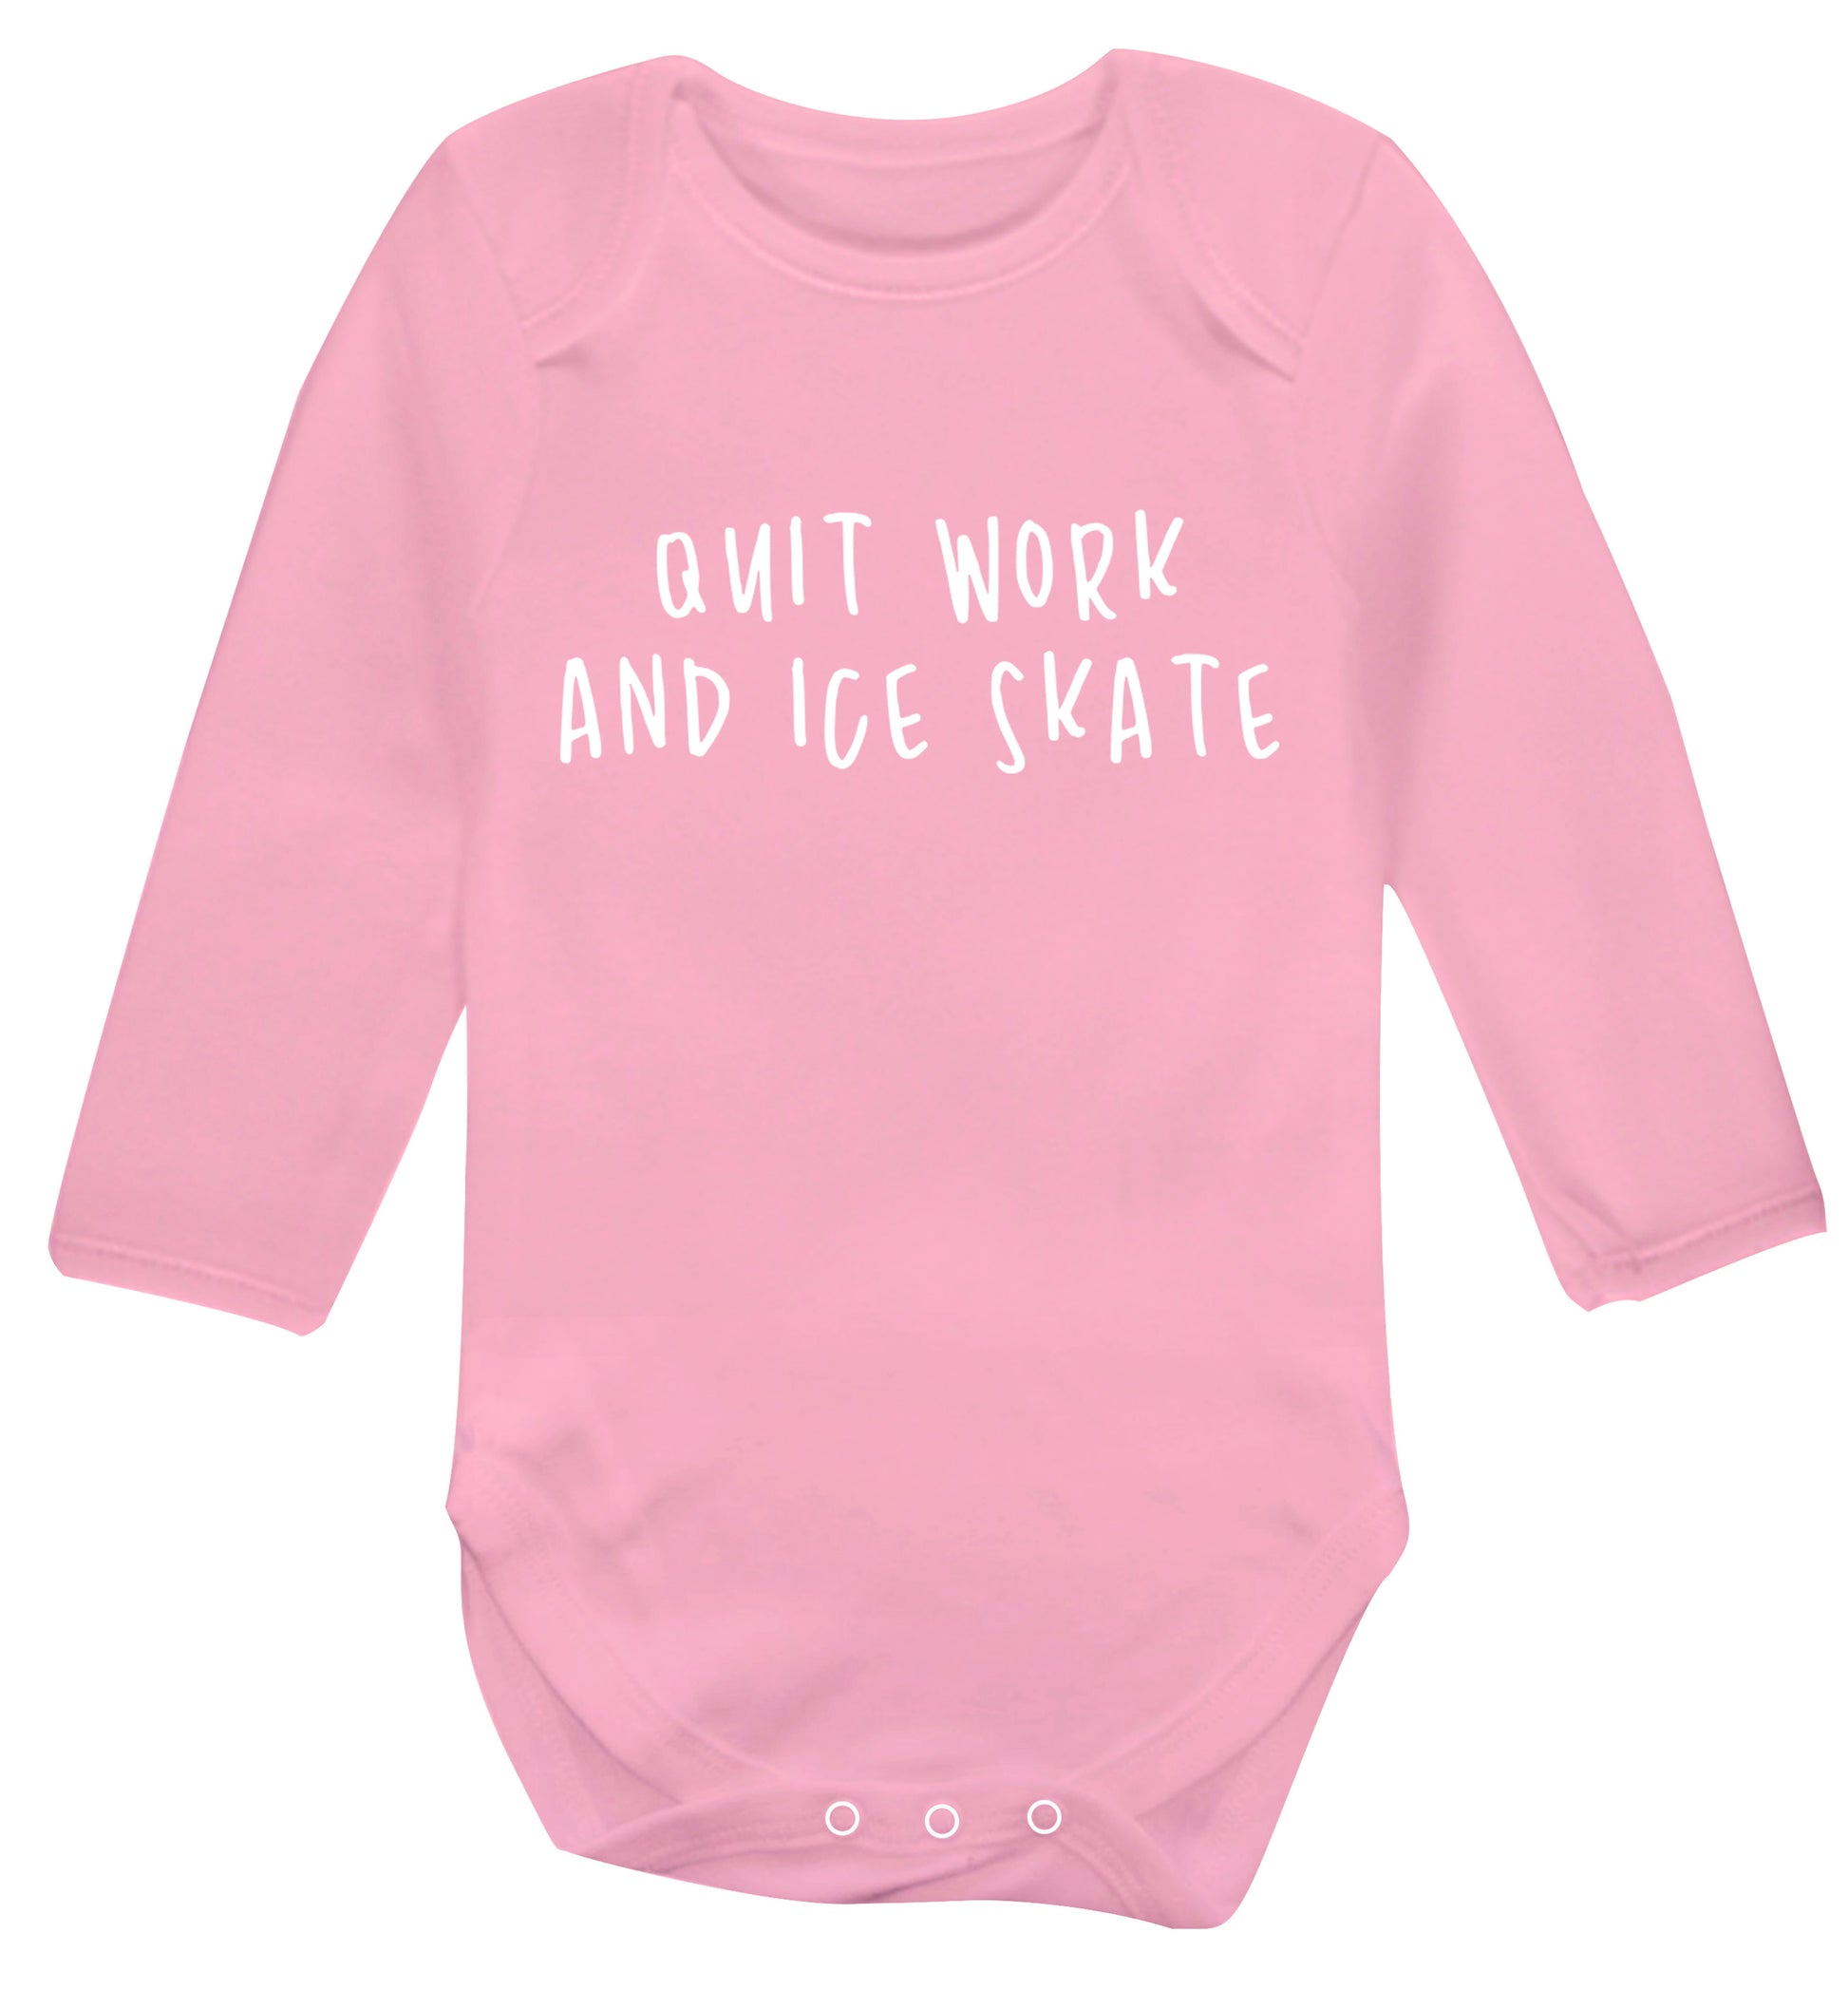 Quit work ice skate Baby Vest long sleeved pale pink 6-12 months